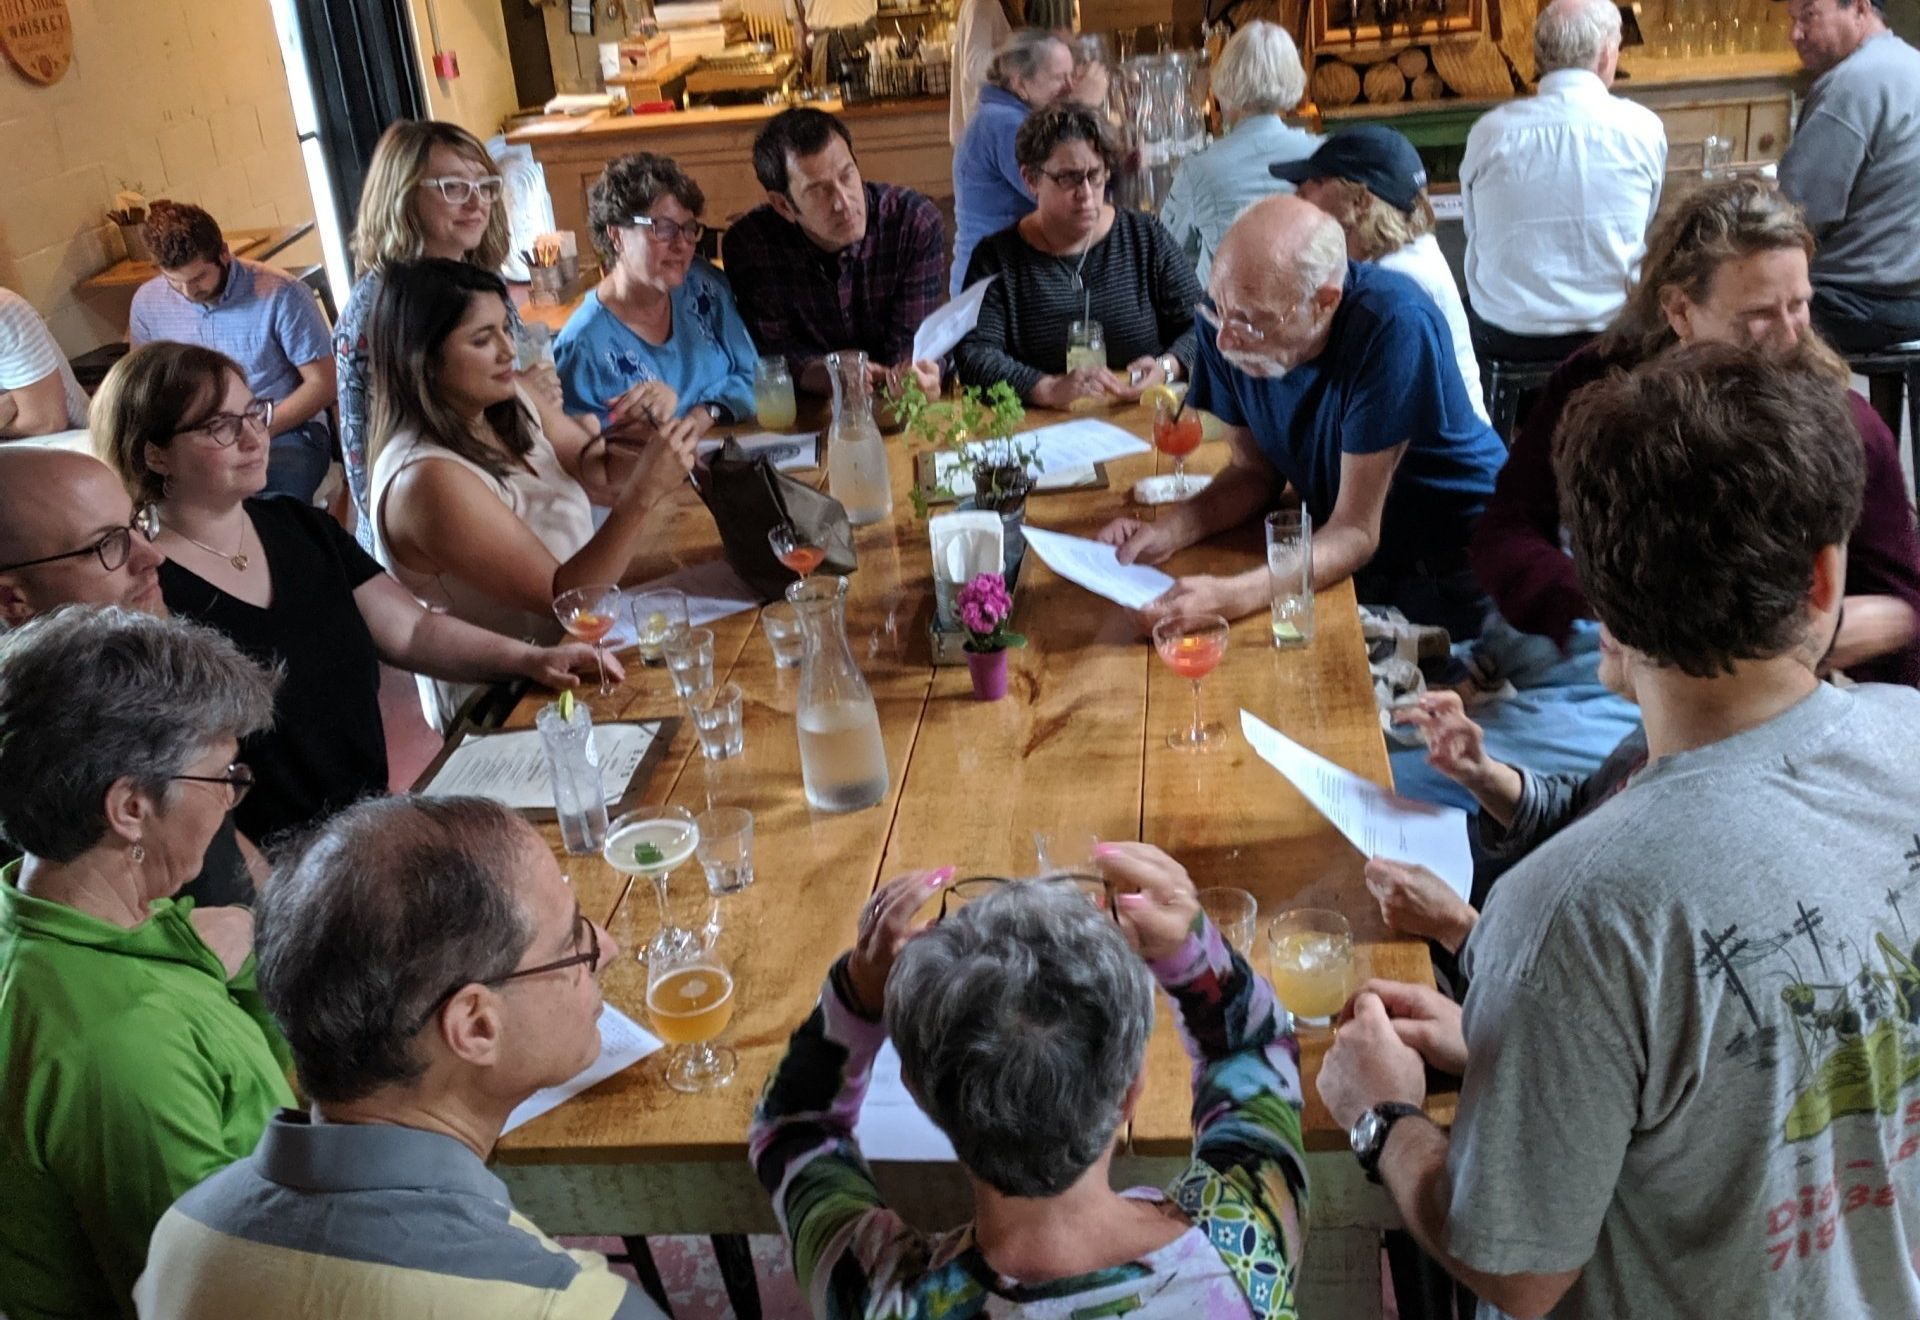 a photo of a group of adults (white, mostly middle aged) standing around a table at a bar, studying and talking to one another